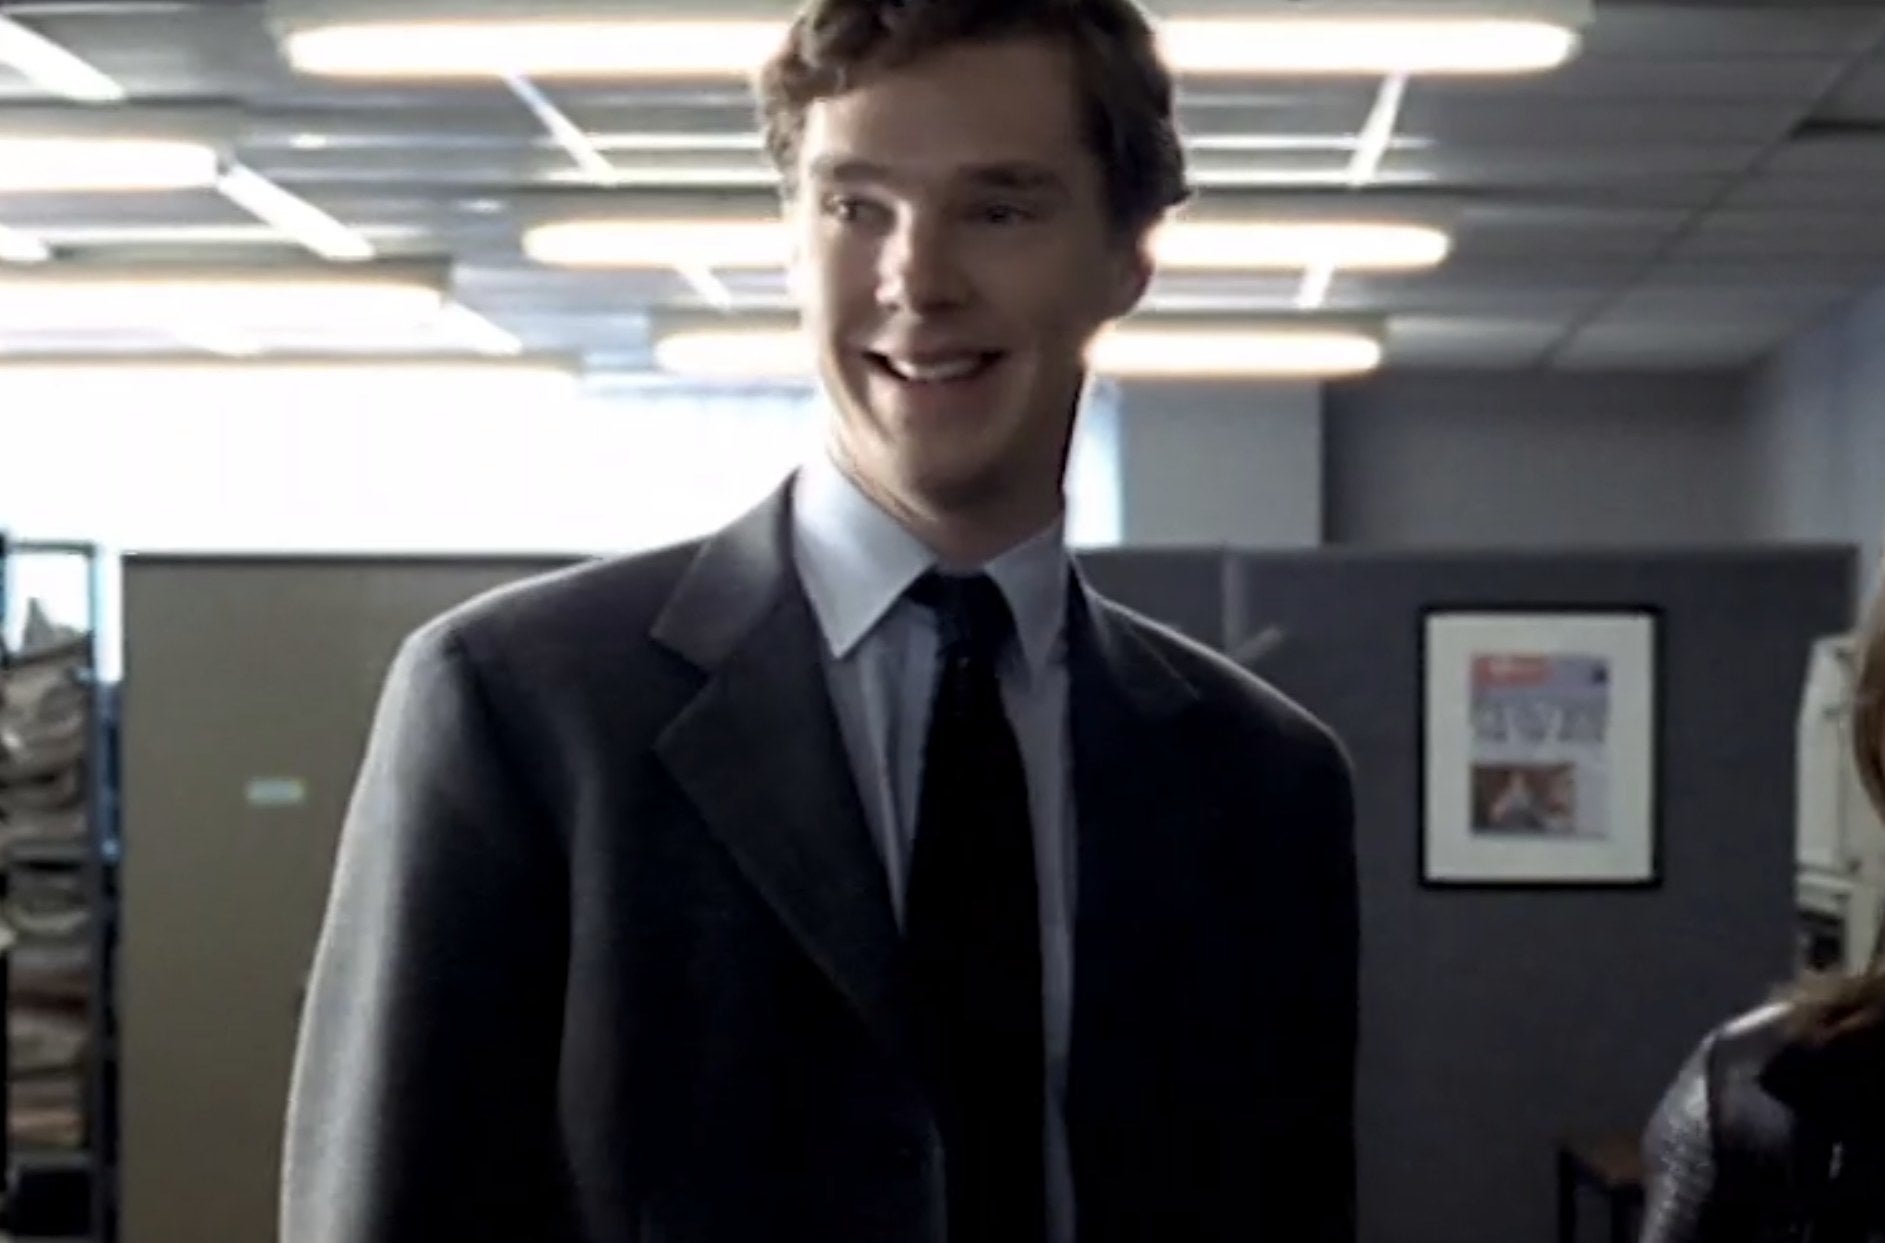 A young Benedict Cumberbatch wearing a suit and tie and smiling